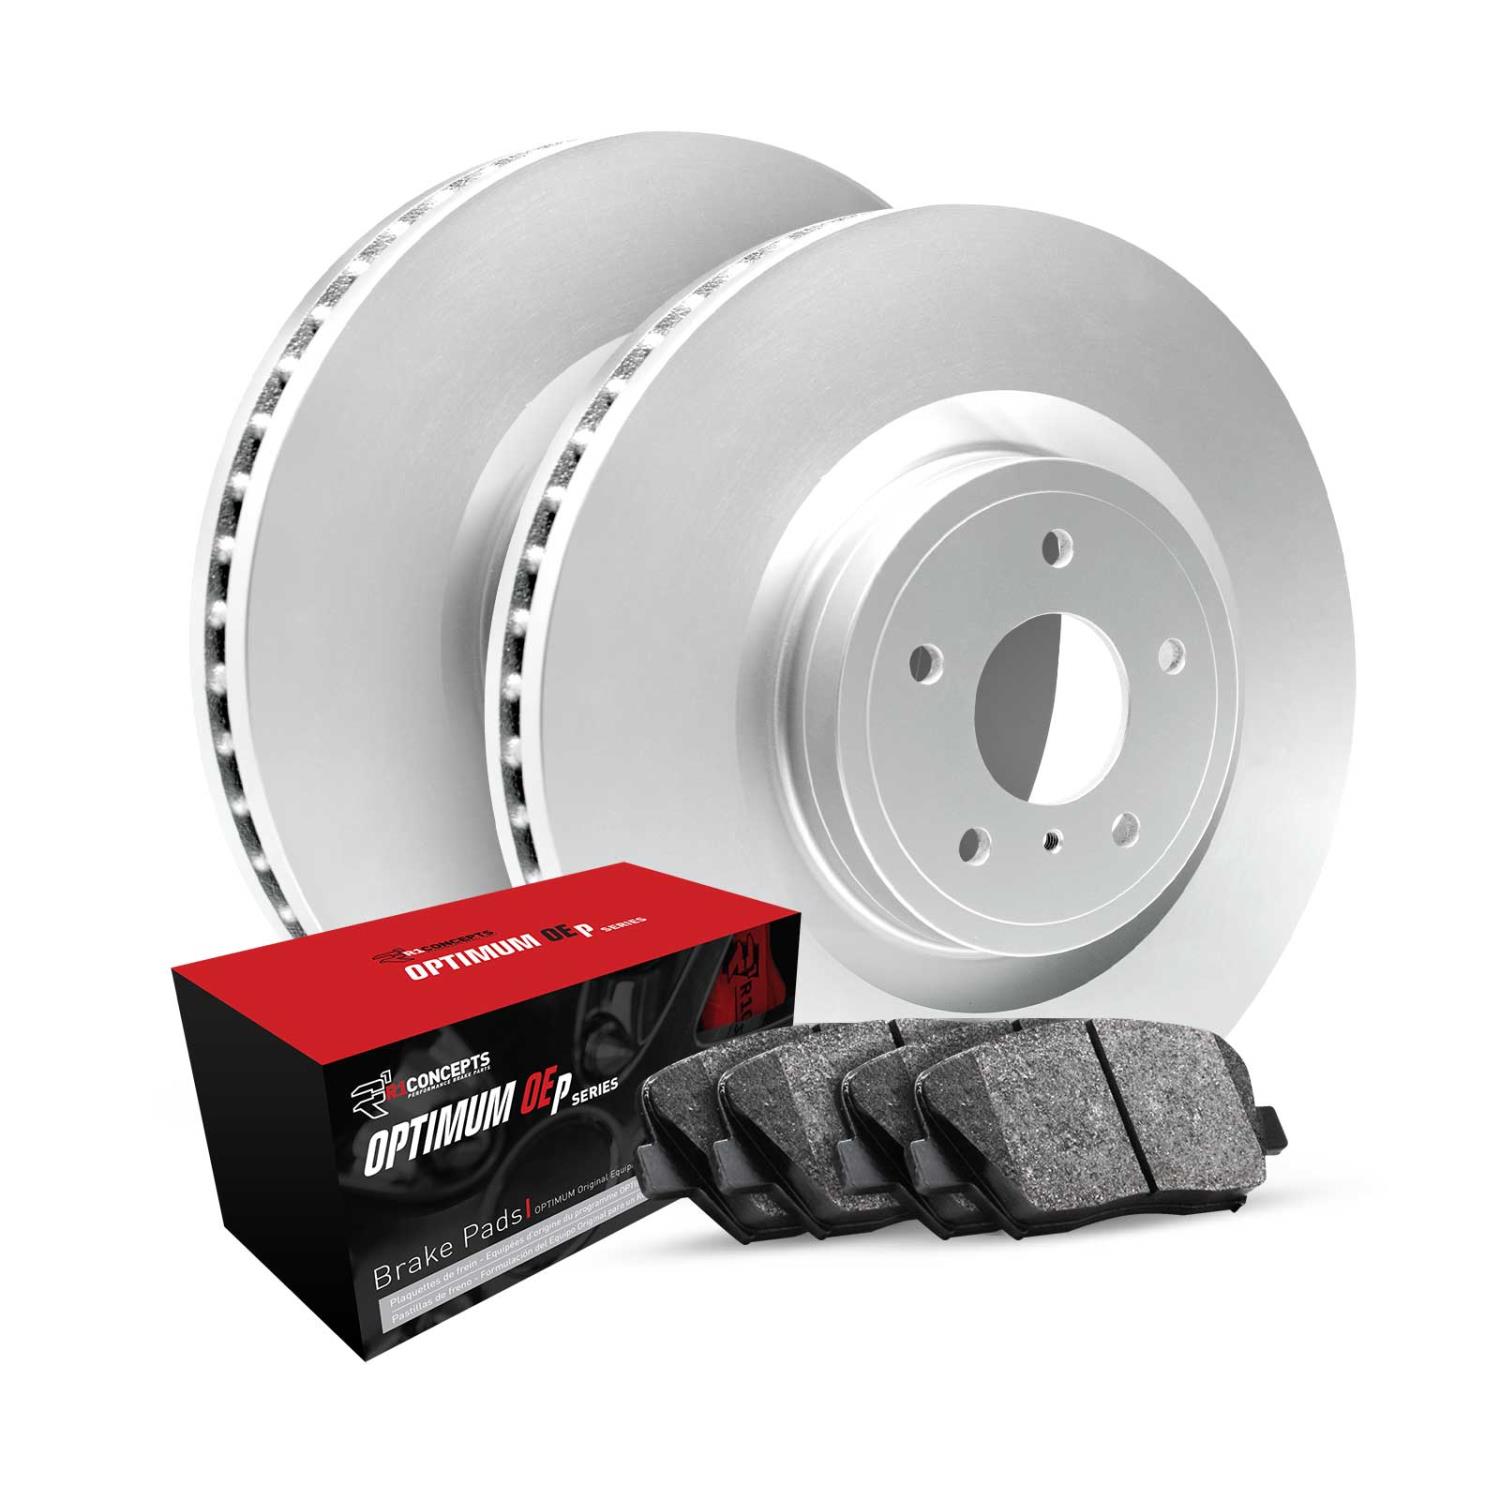 GEO-Carbon Brake Rotor Set w/Optimum OE Pads, Fits Select Fits Multiple Makes/Models, Position: Rear